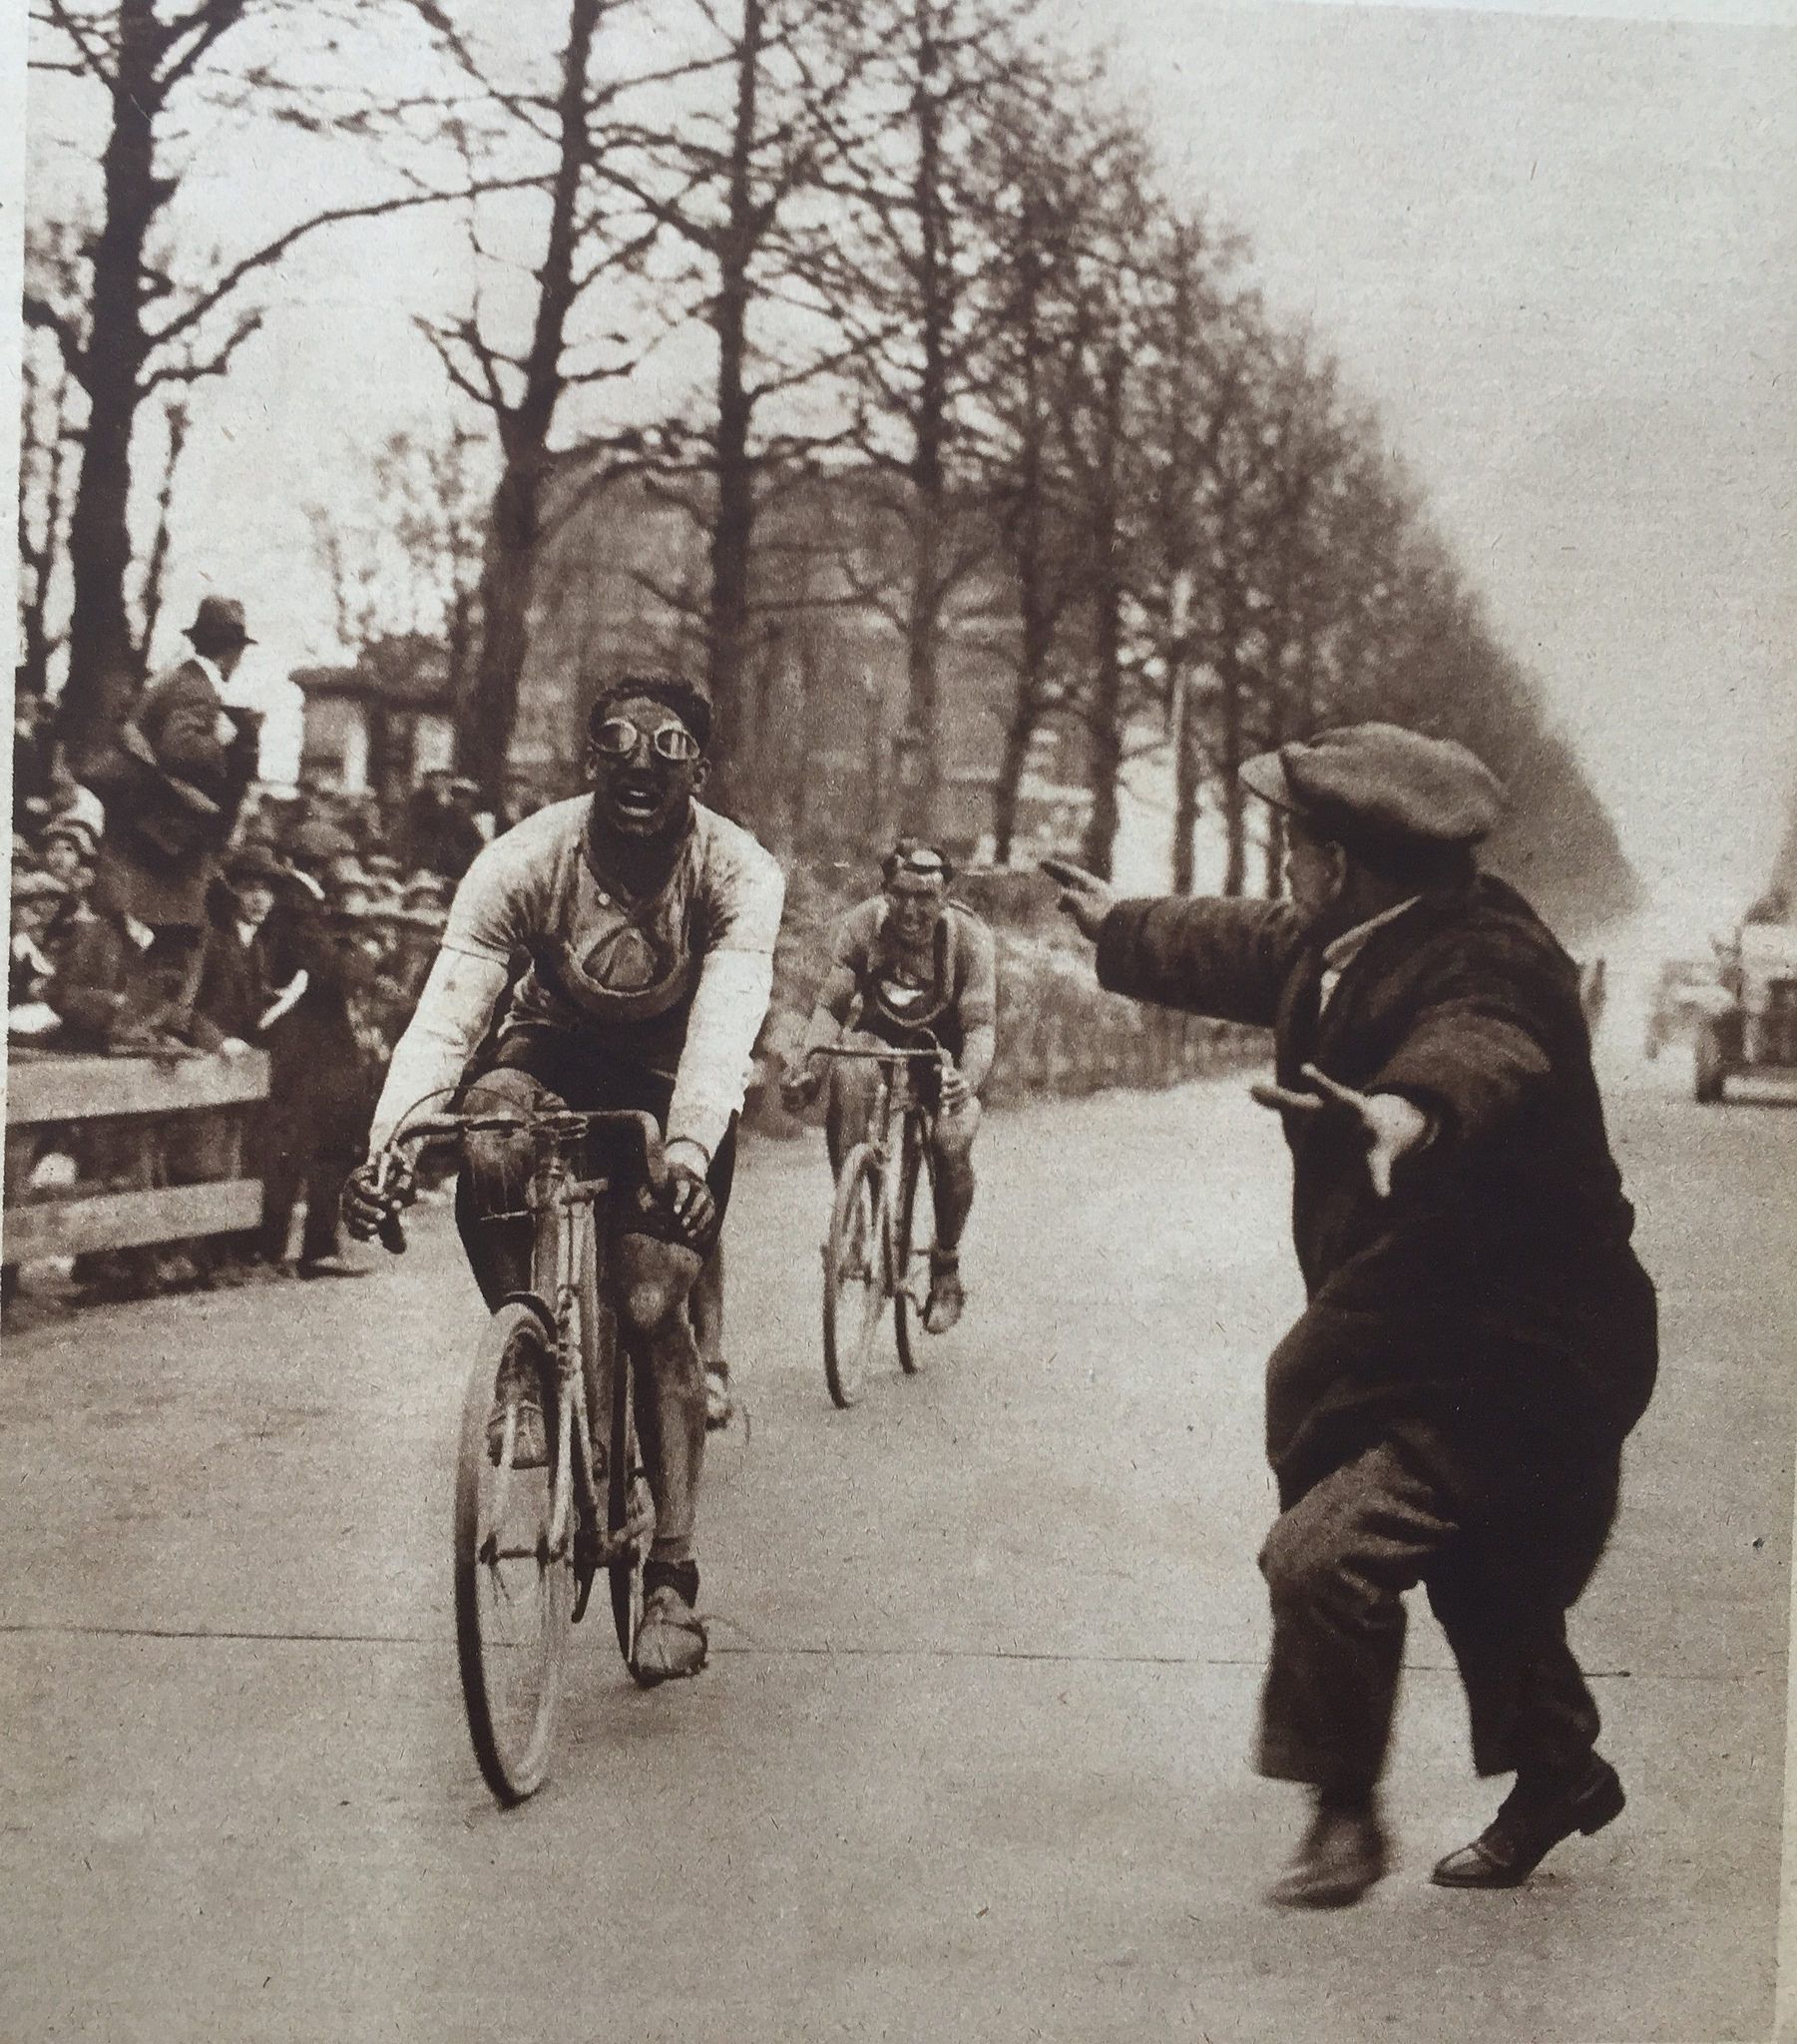 André Leducq crossing the finish line at Paris-Roubaix in 1928